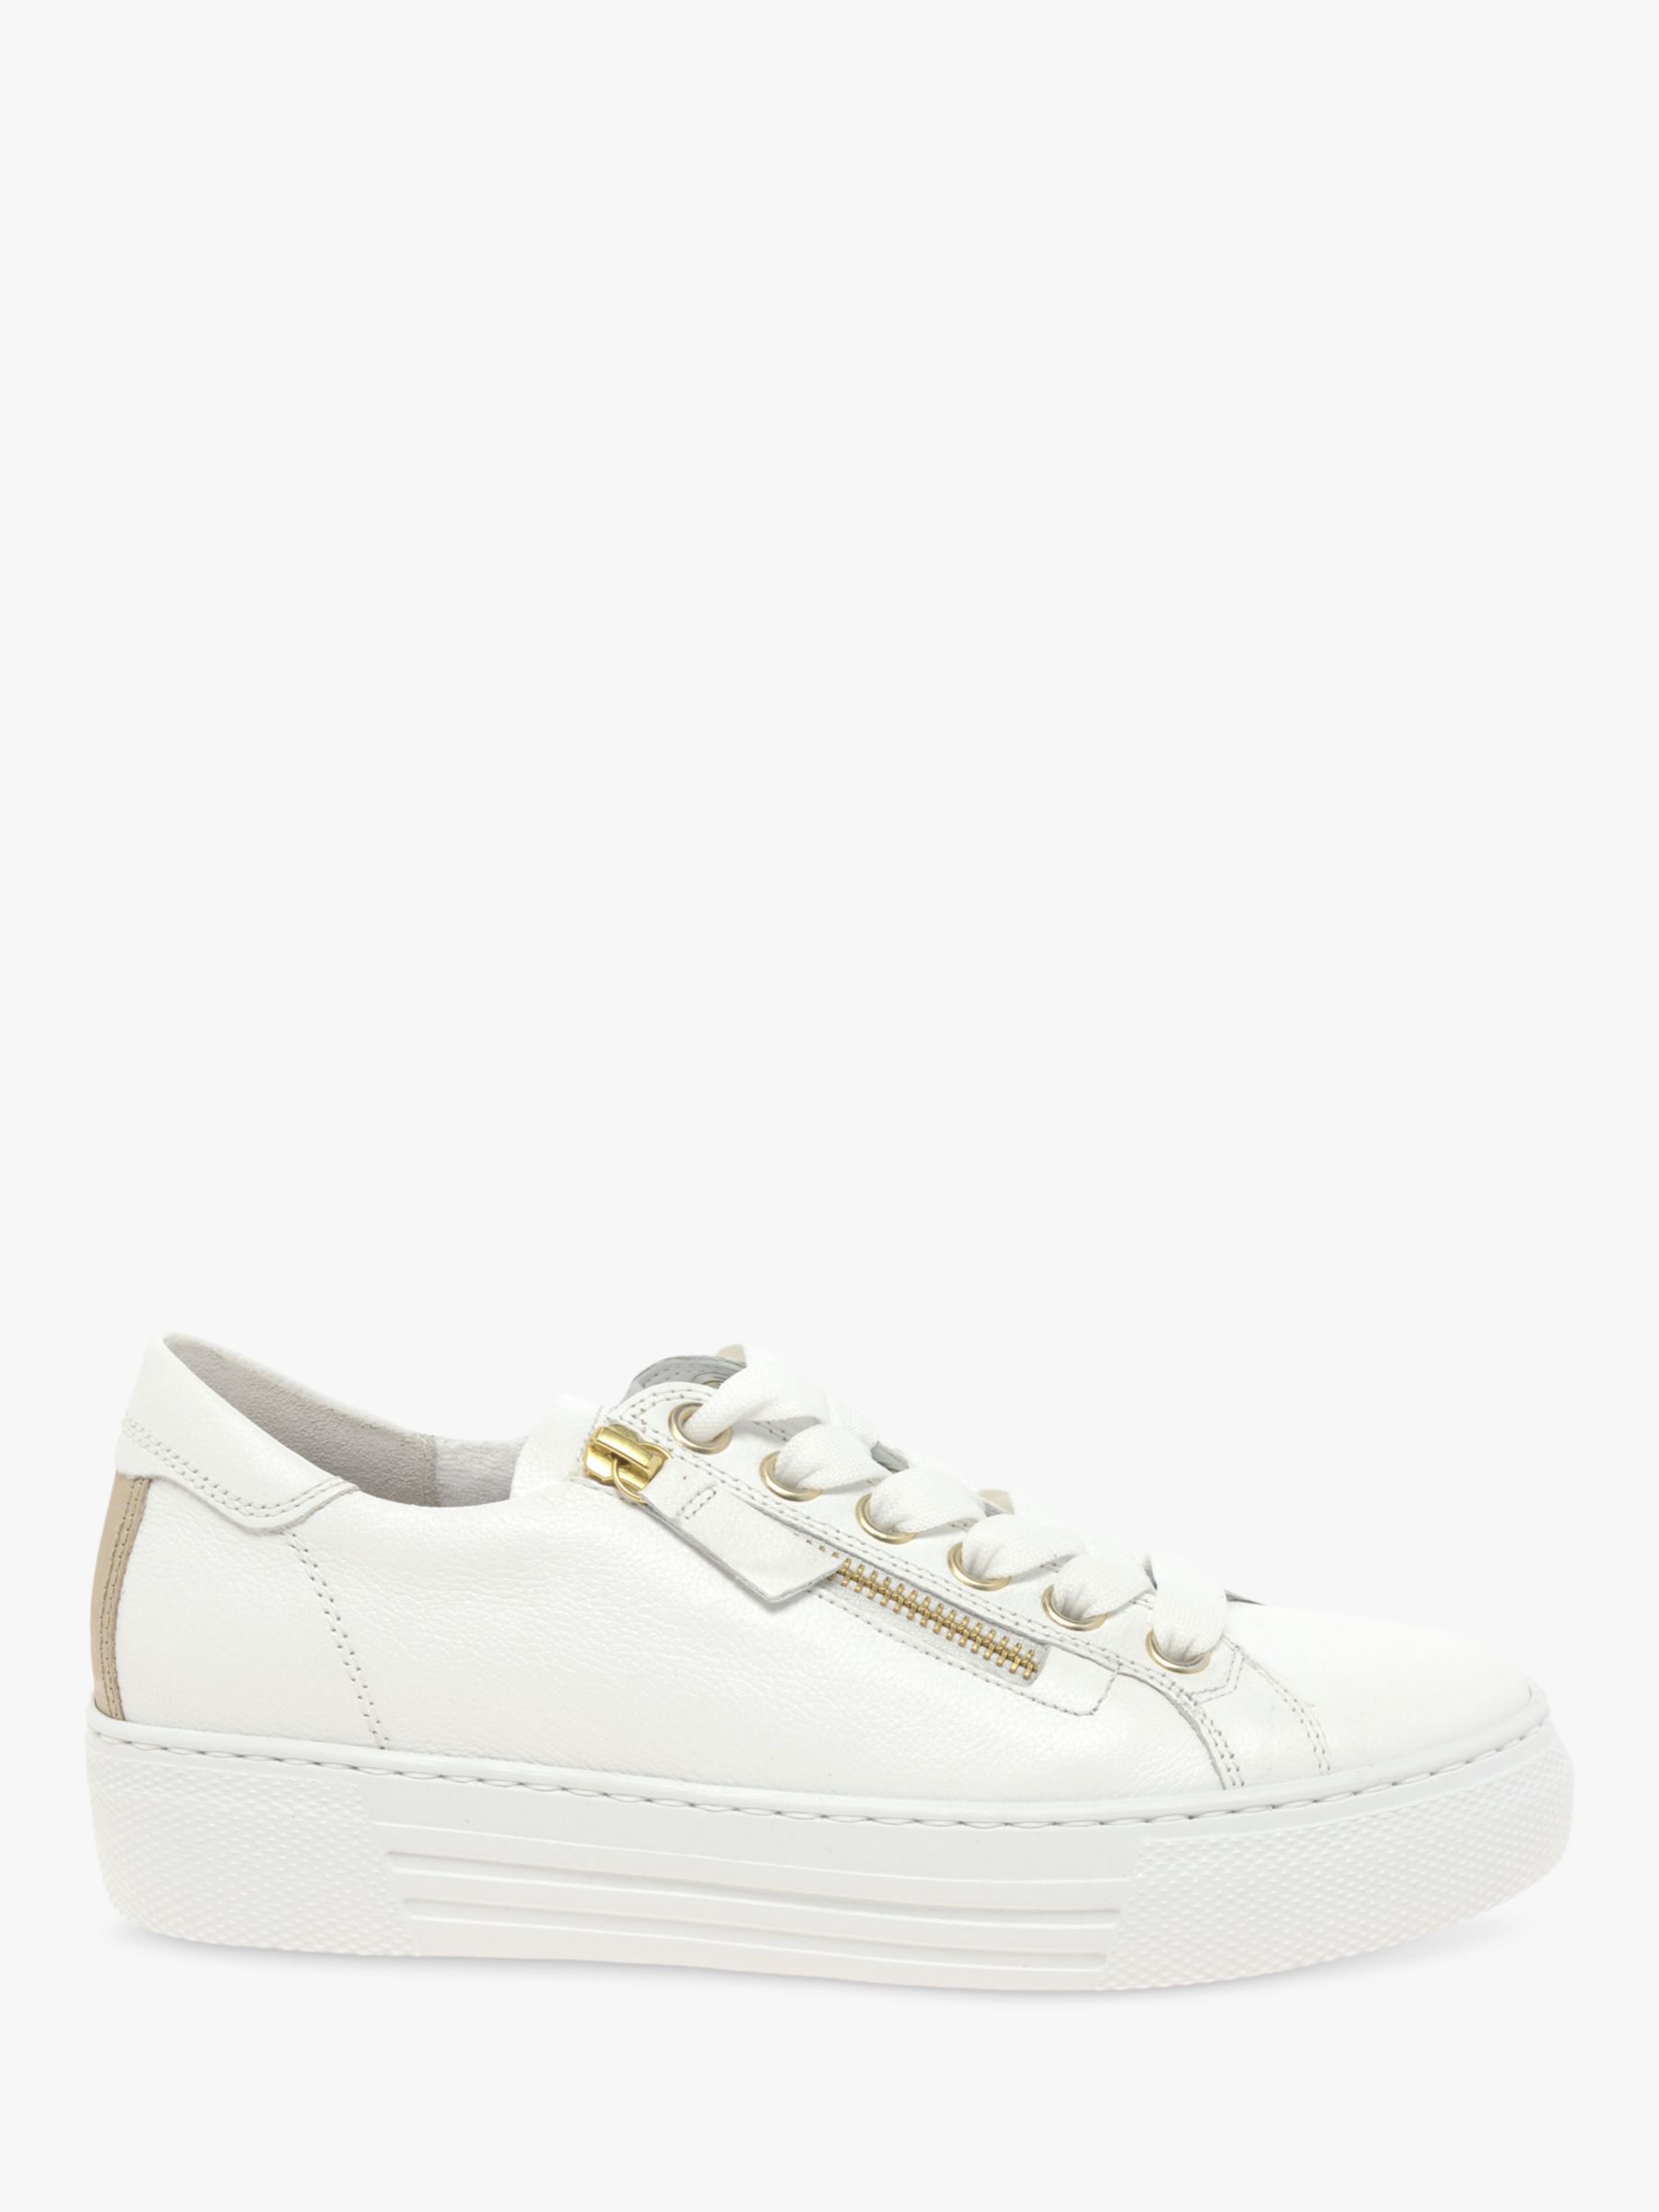 Gabor Campus Low Top Leather Trainers, White/Gold